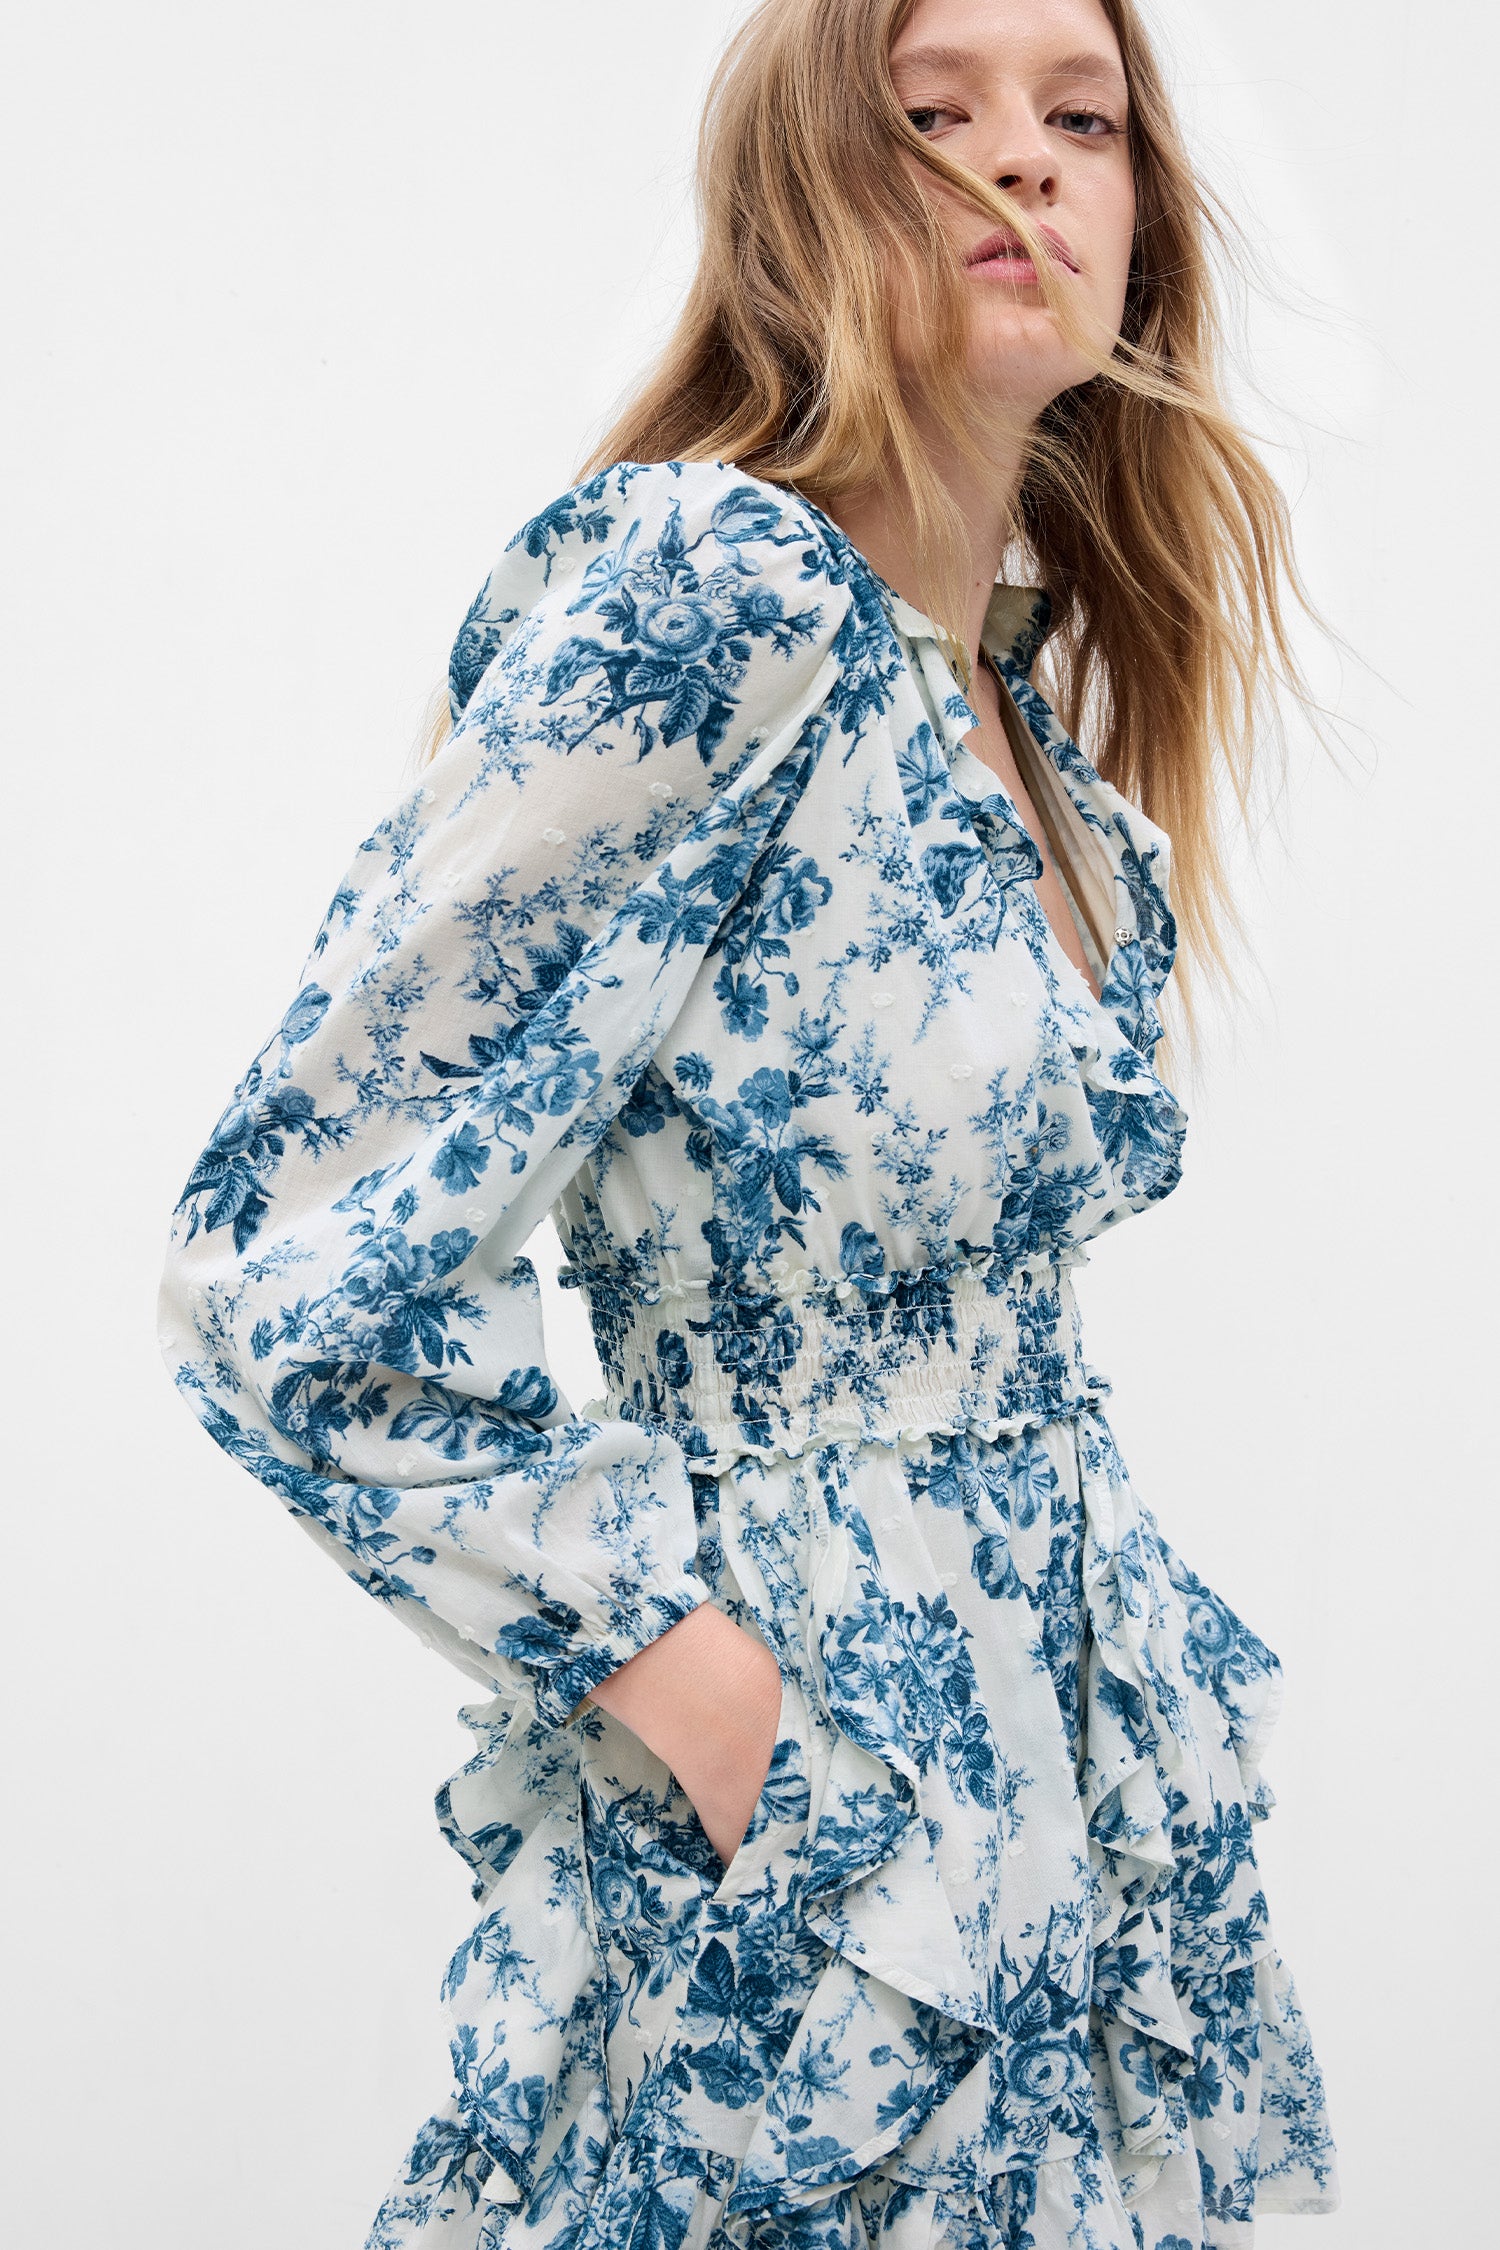 Model wearing white and blue floral mini dress with puff long sleeves, ruffled hem, and smocked waist